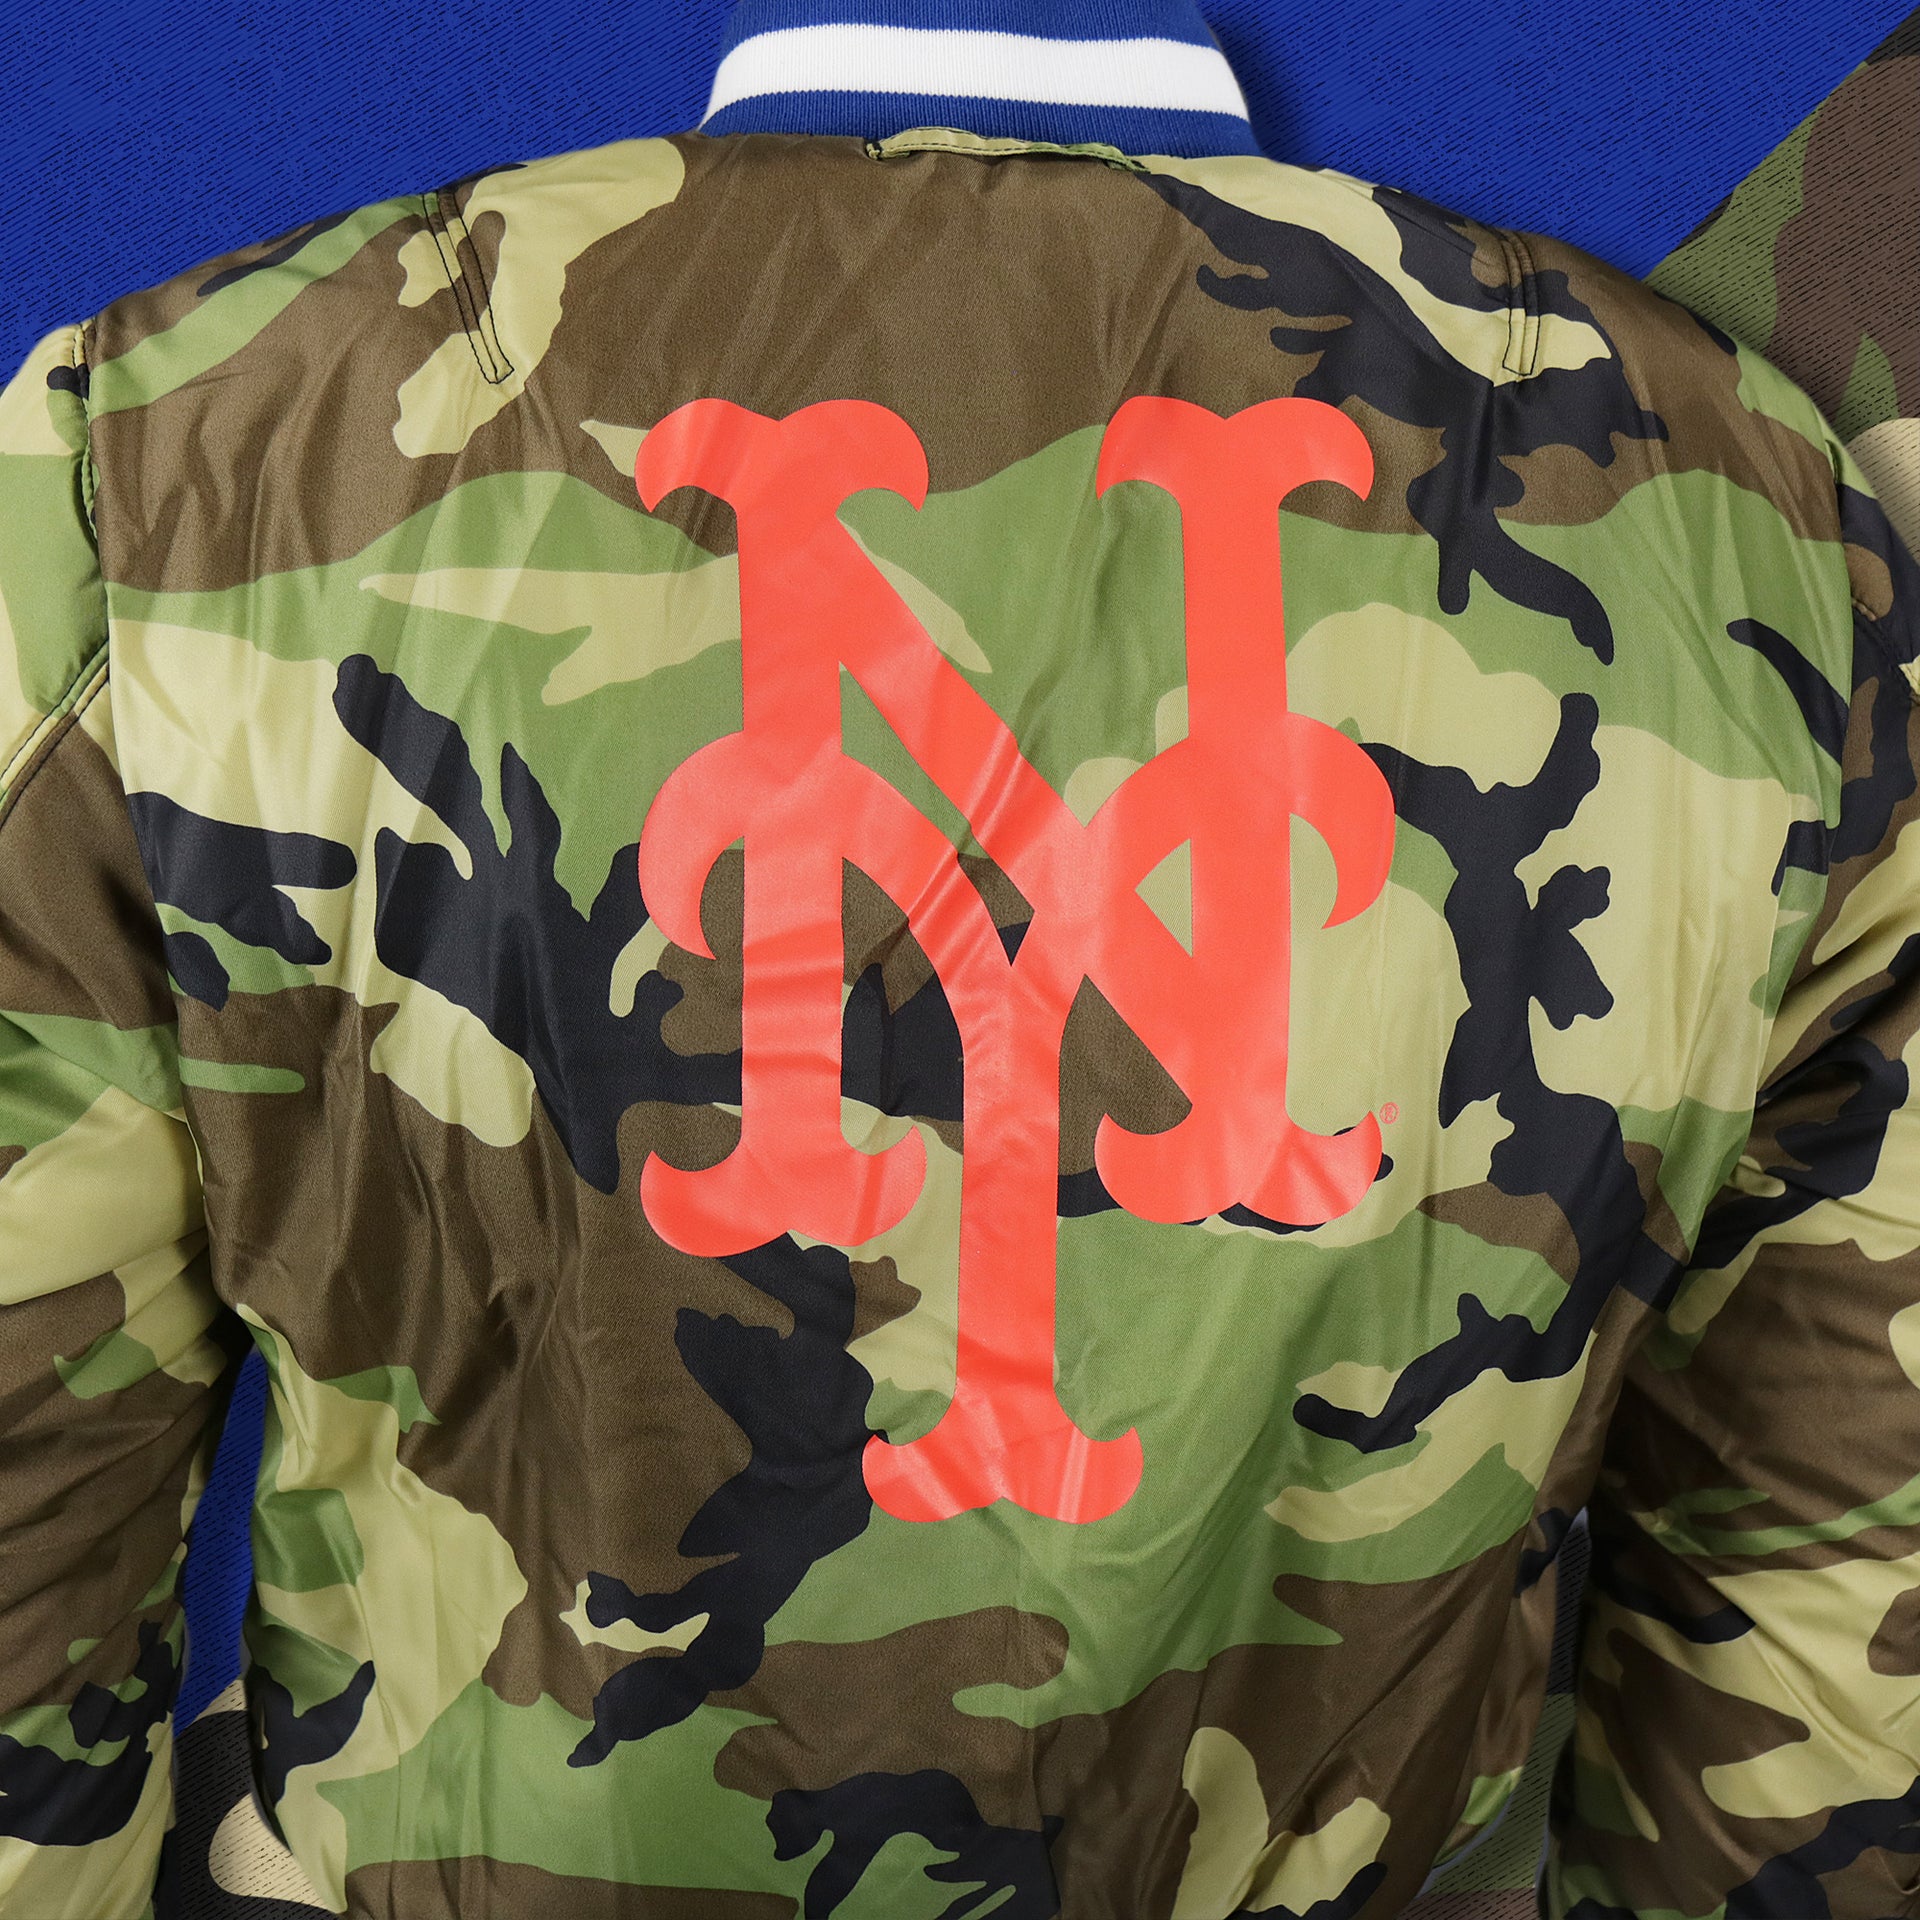 The New York Mets Logo Printed in Orange on the New York Mets MLB Patch Alpha Industries Reversible Bomber Jacket With Camo Liner | Royal Blue Bomber Jacket